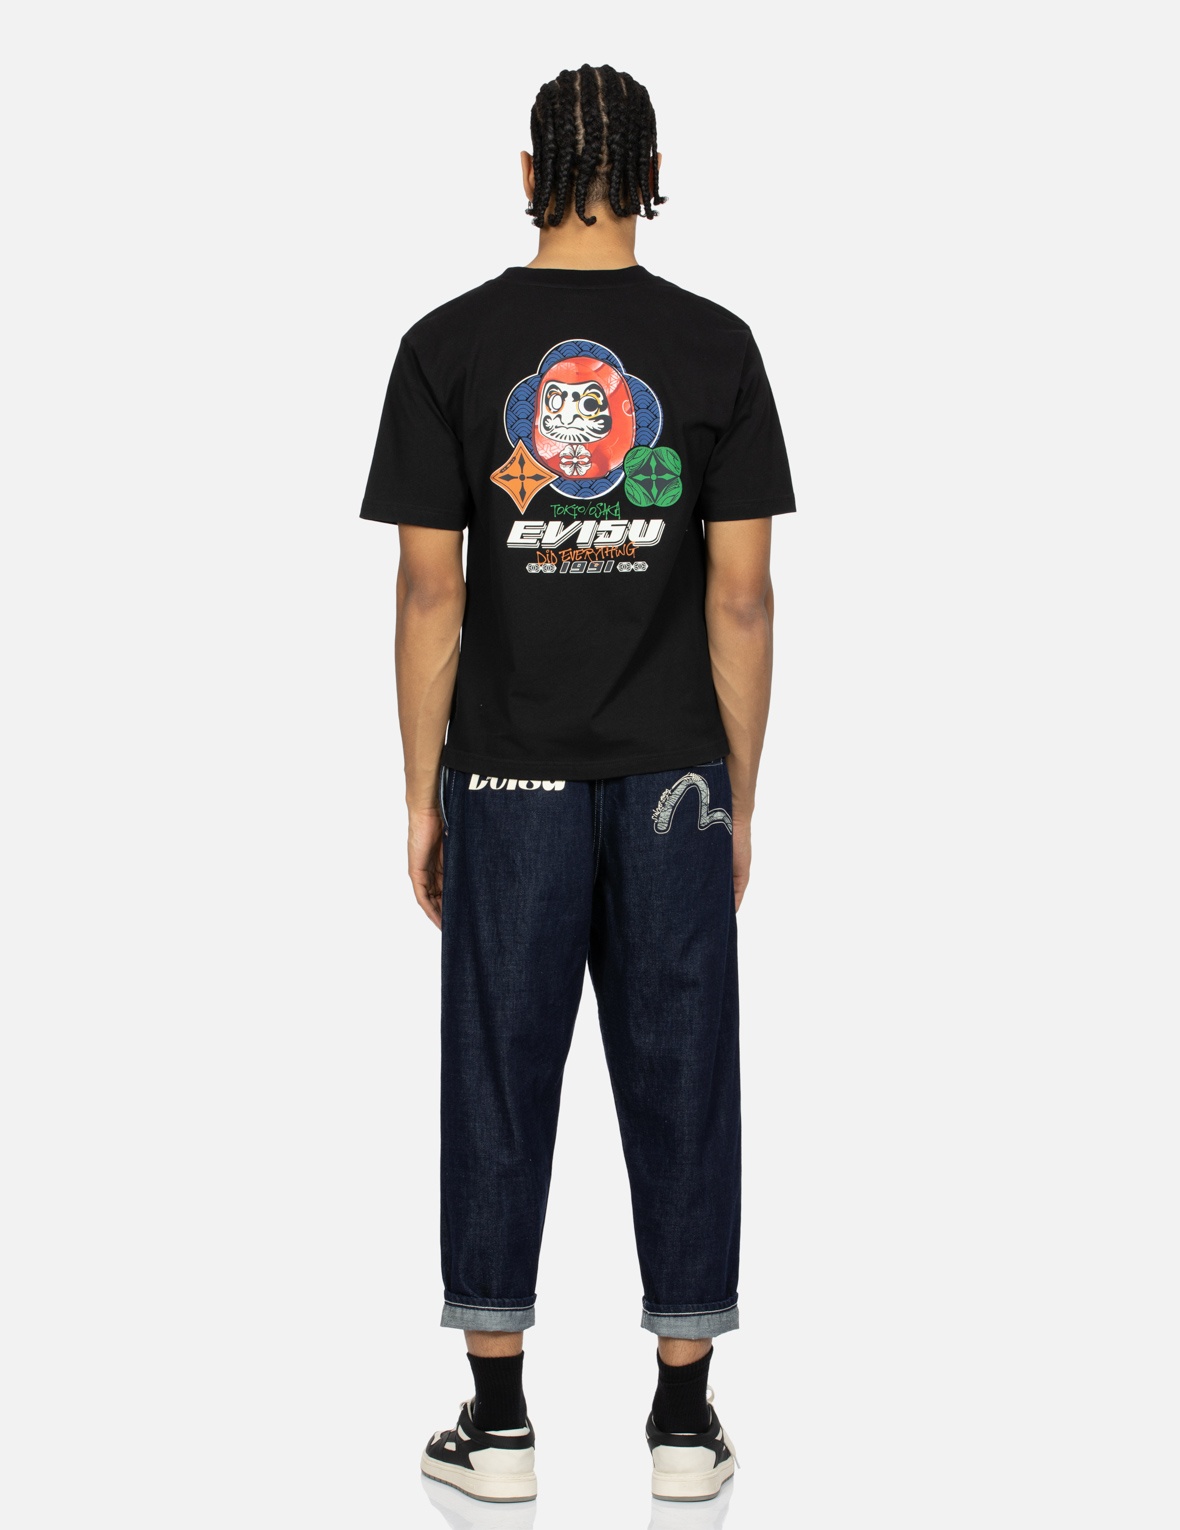 SEAGULL AND LOGO PRINT BALLOON FIT JEANS - 5